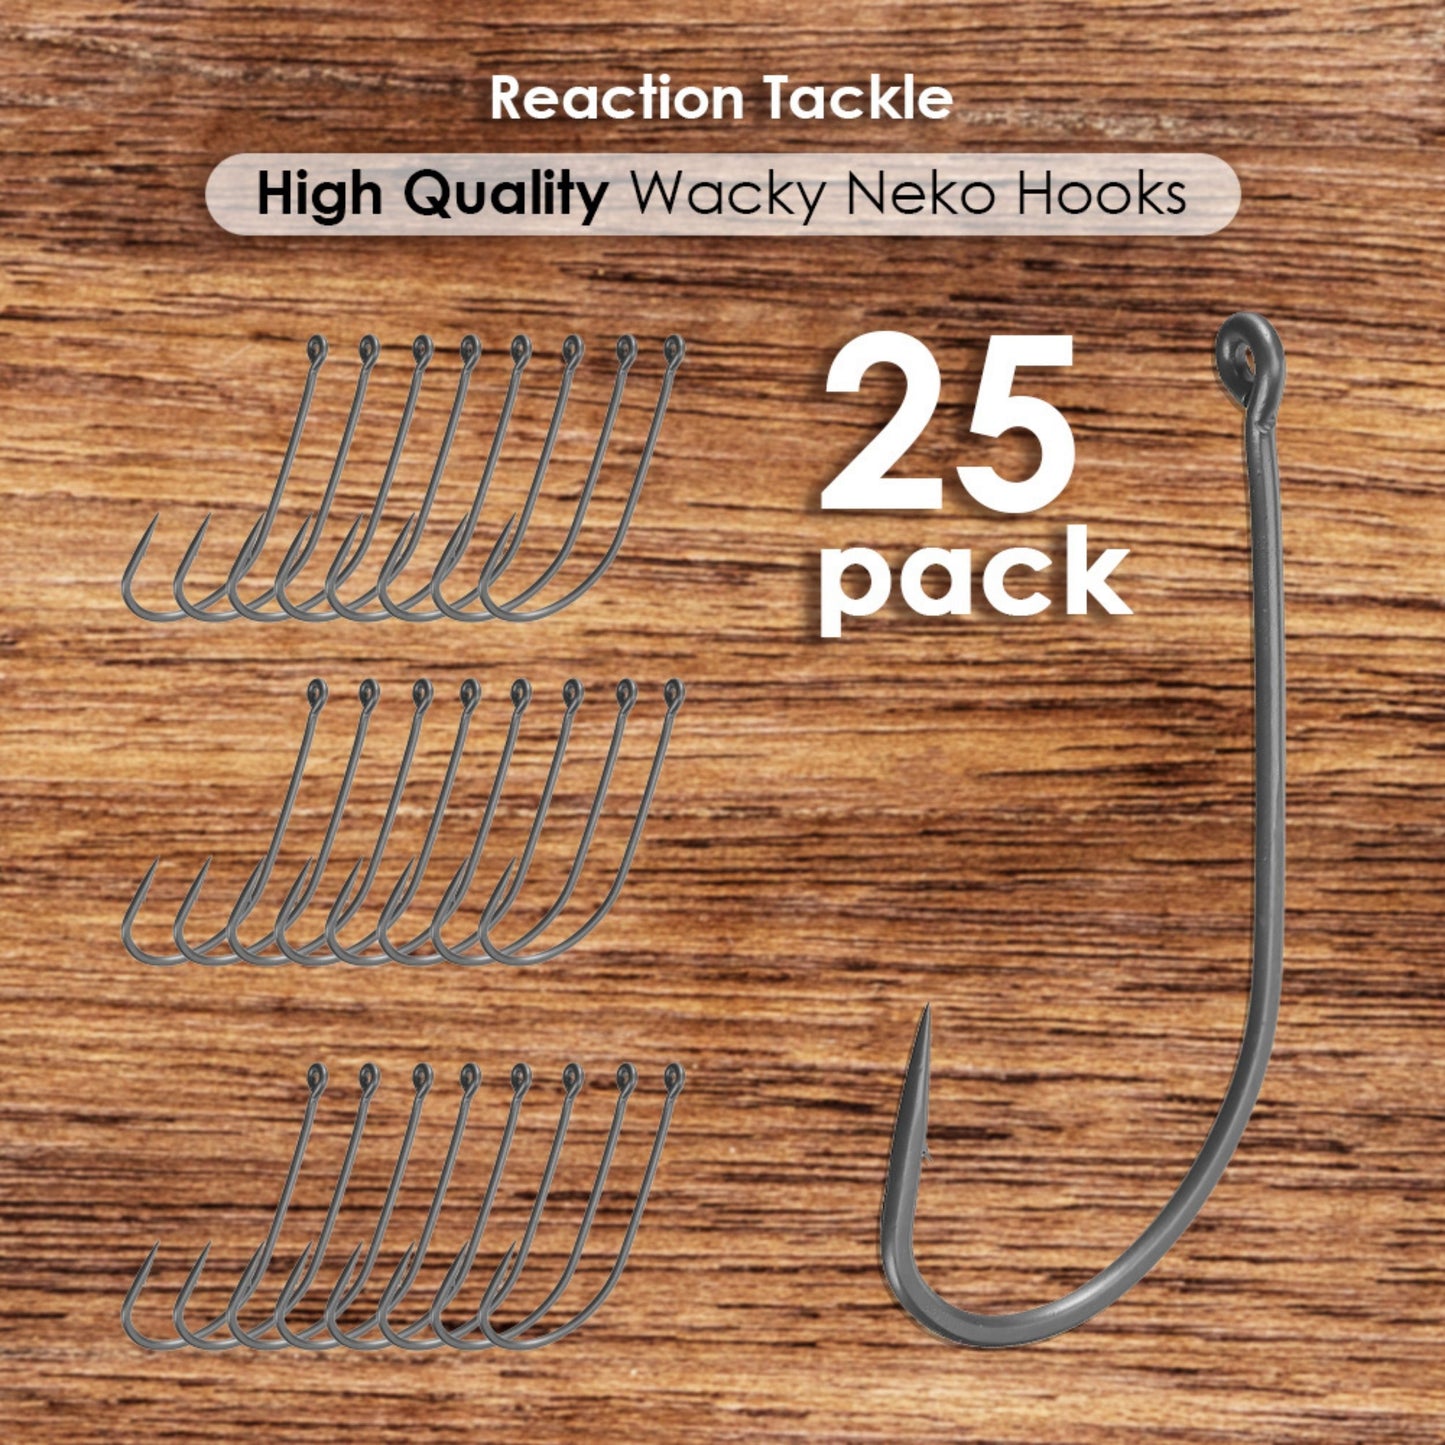 REACTION TACKLE HIGH QUALITY WACKY TOOL OR O-RINGS